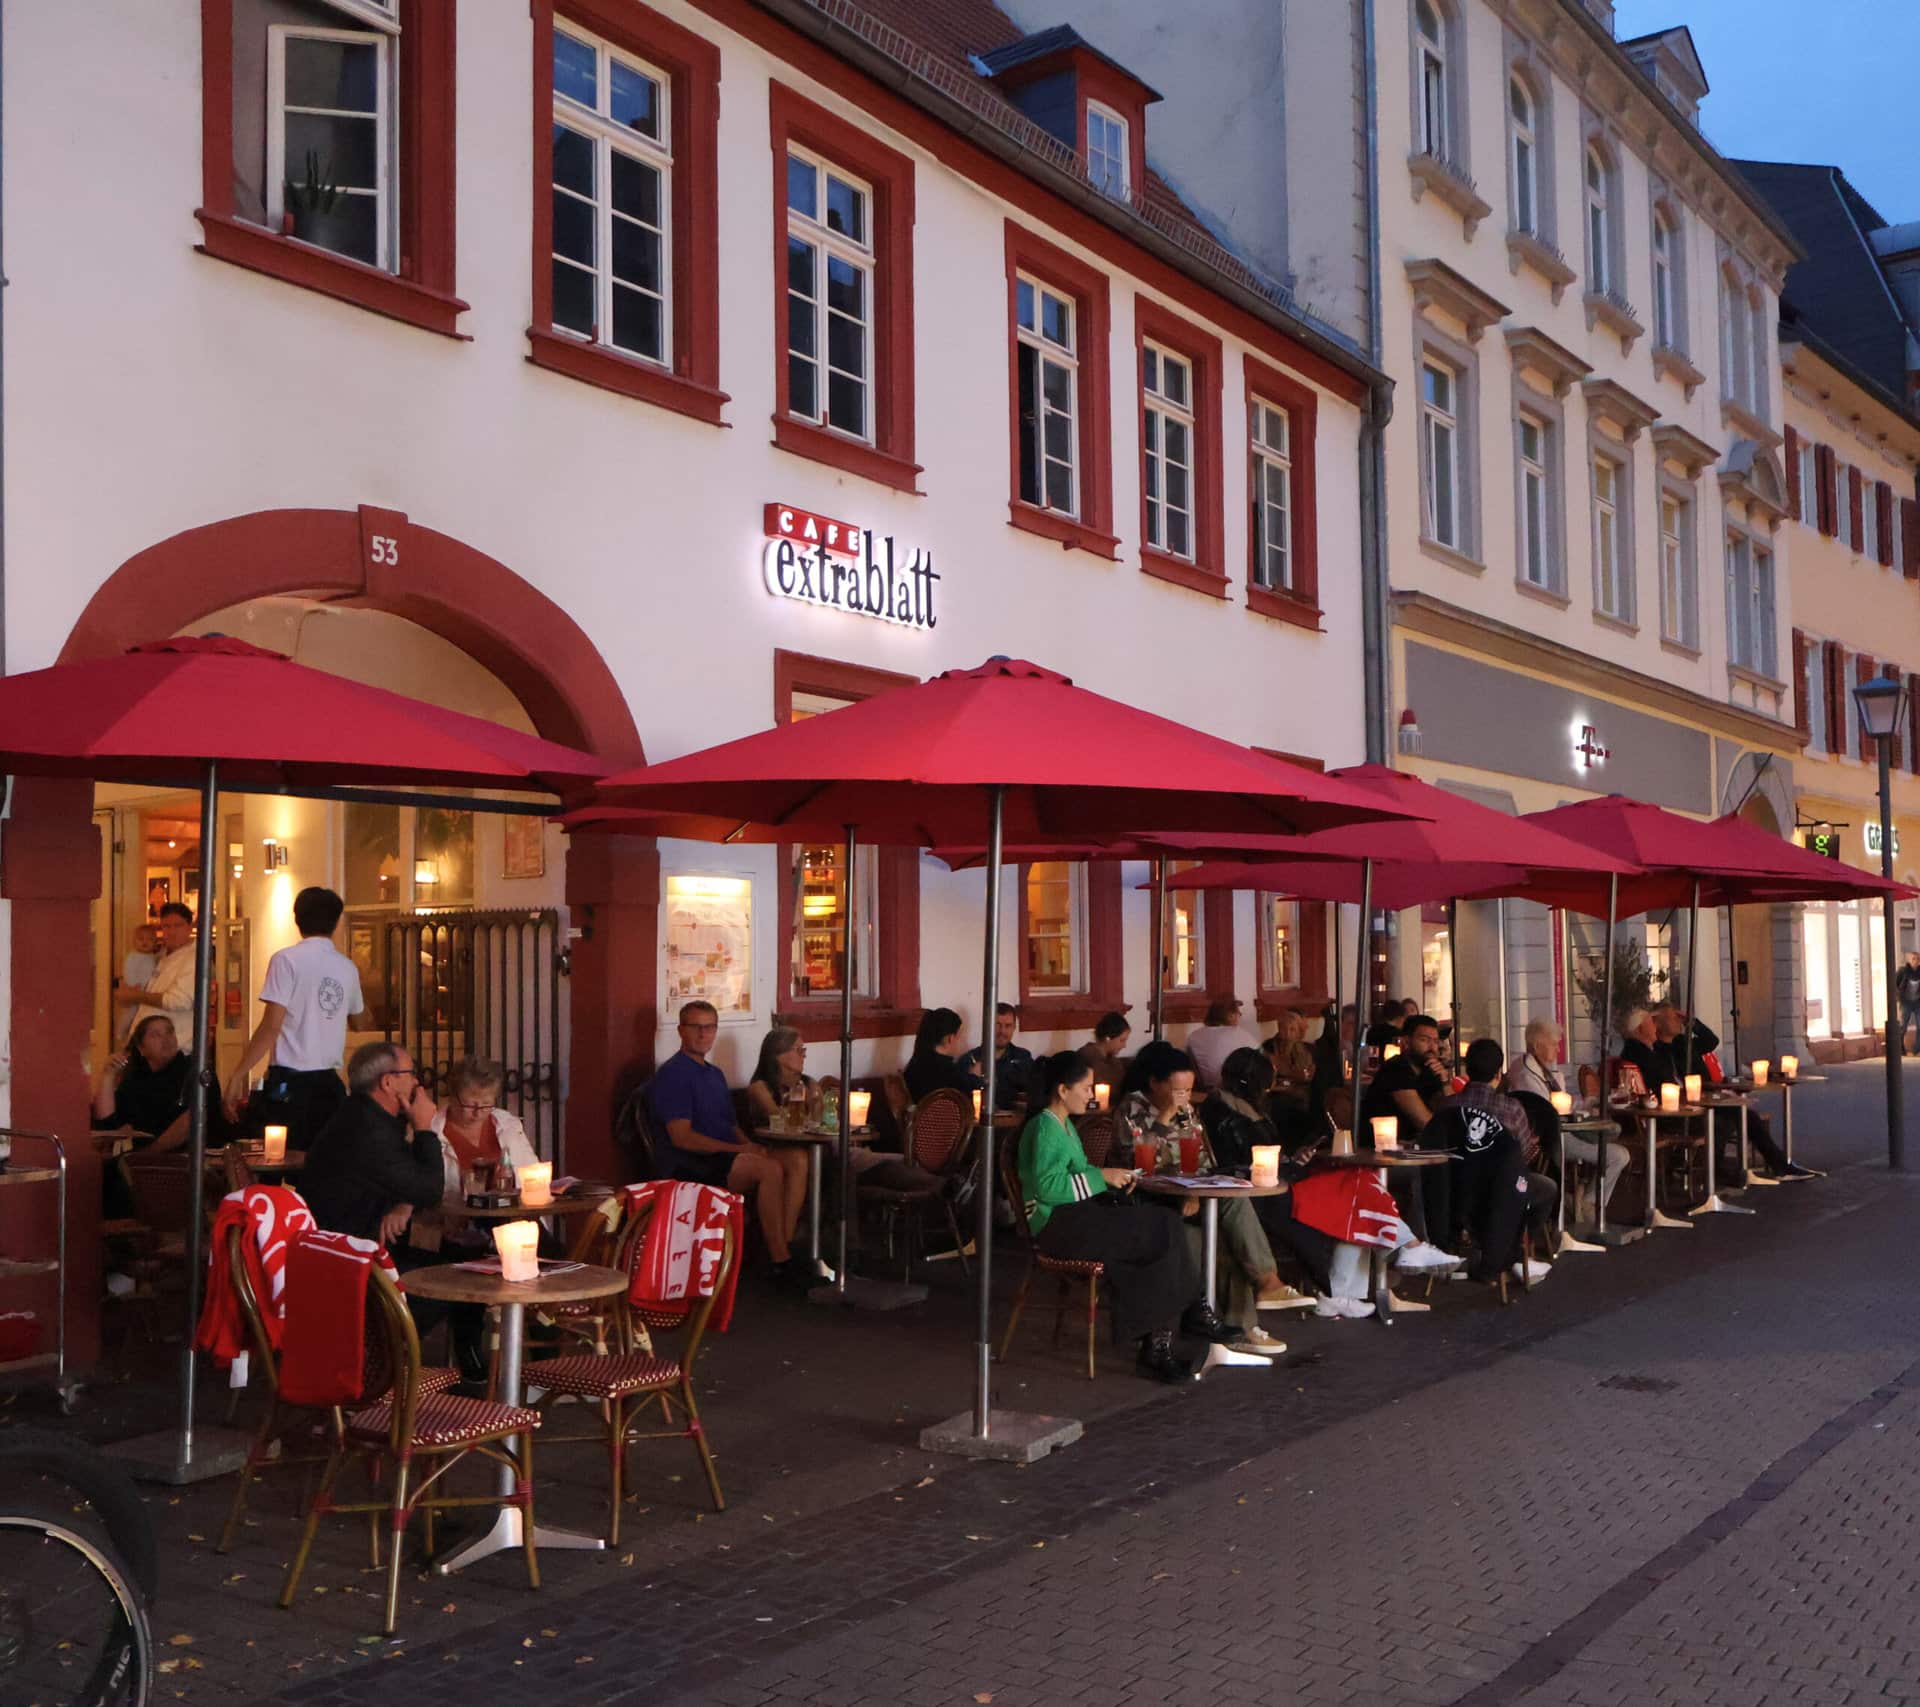 Restaurant with bistro tables and chairs outside in the dark